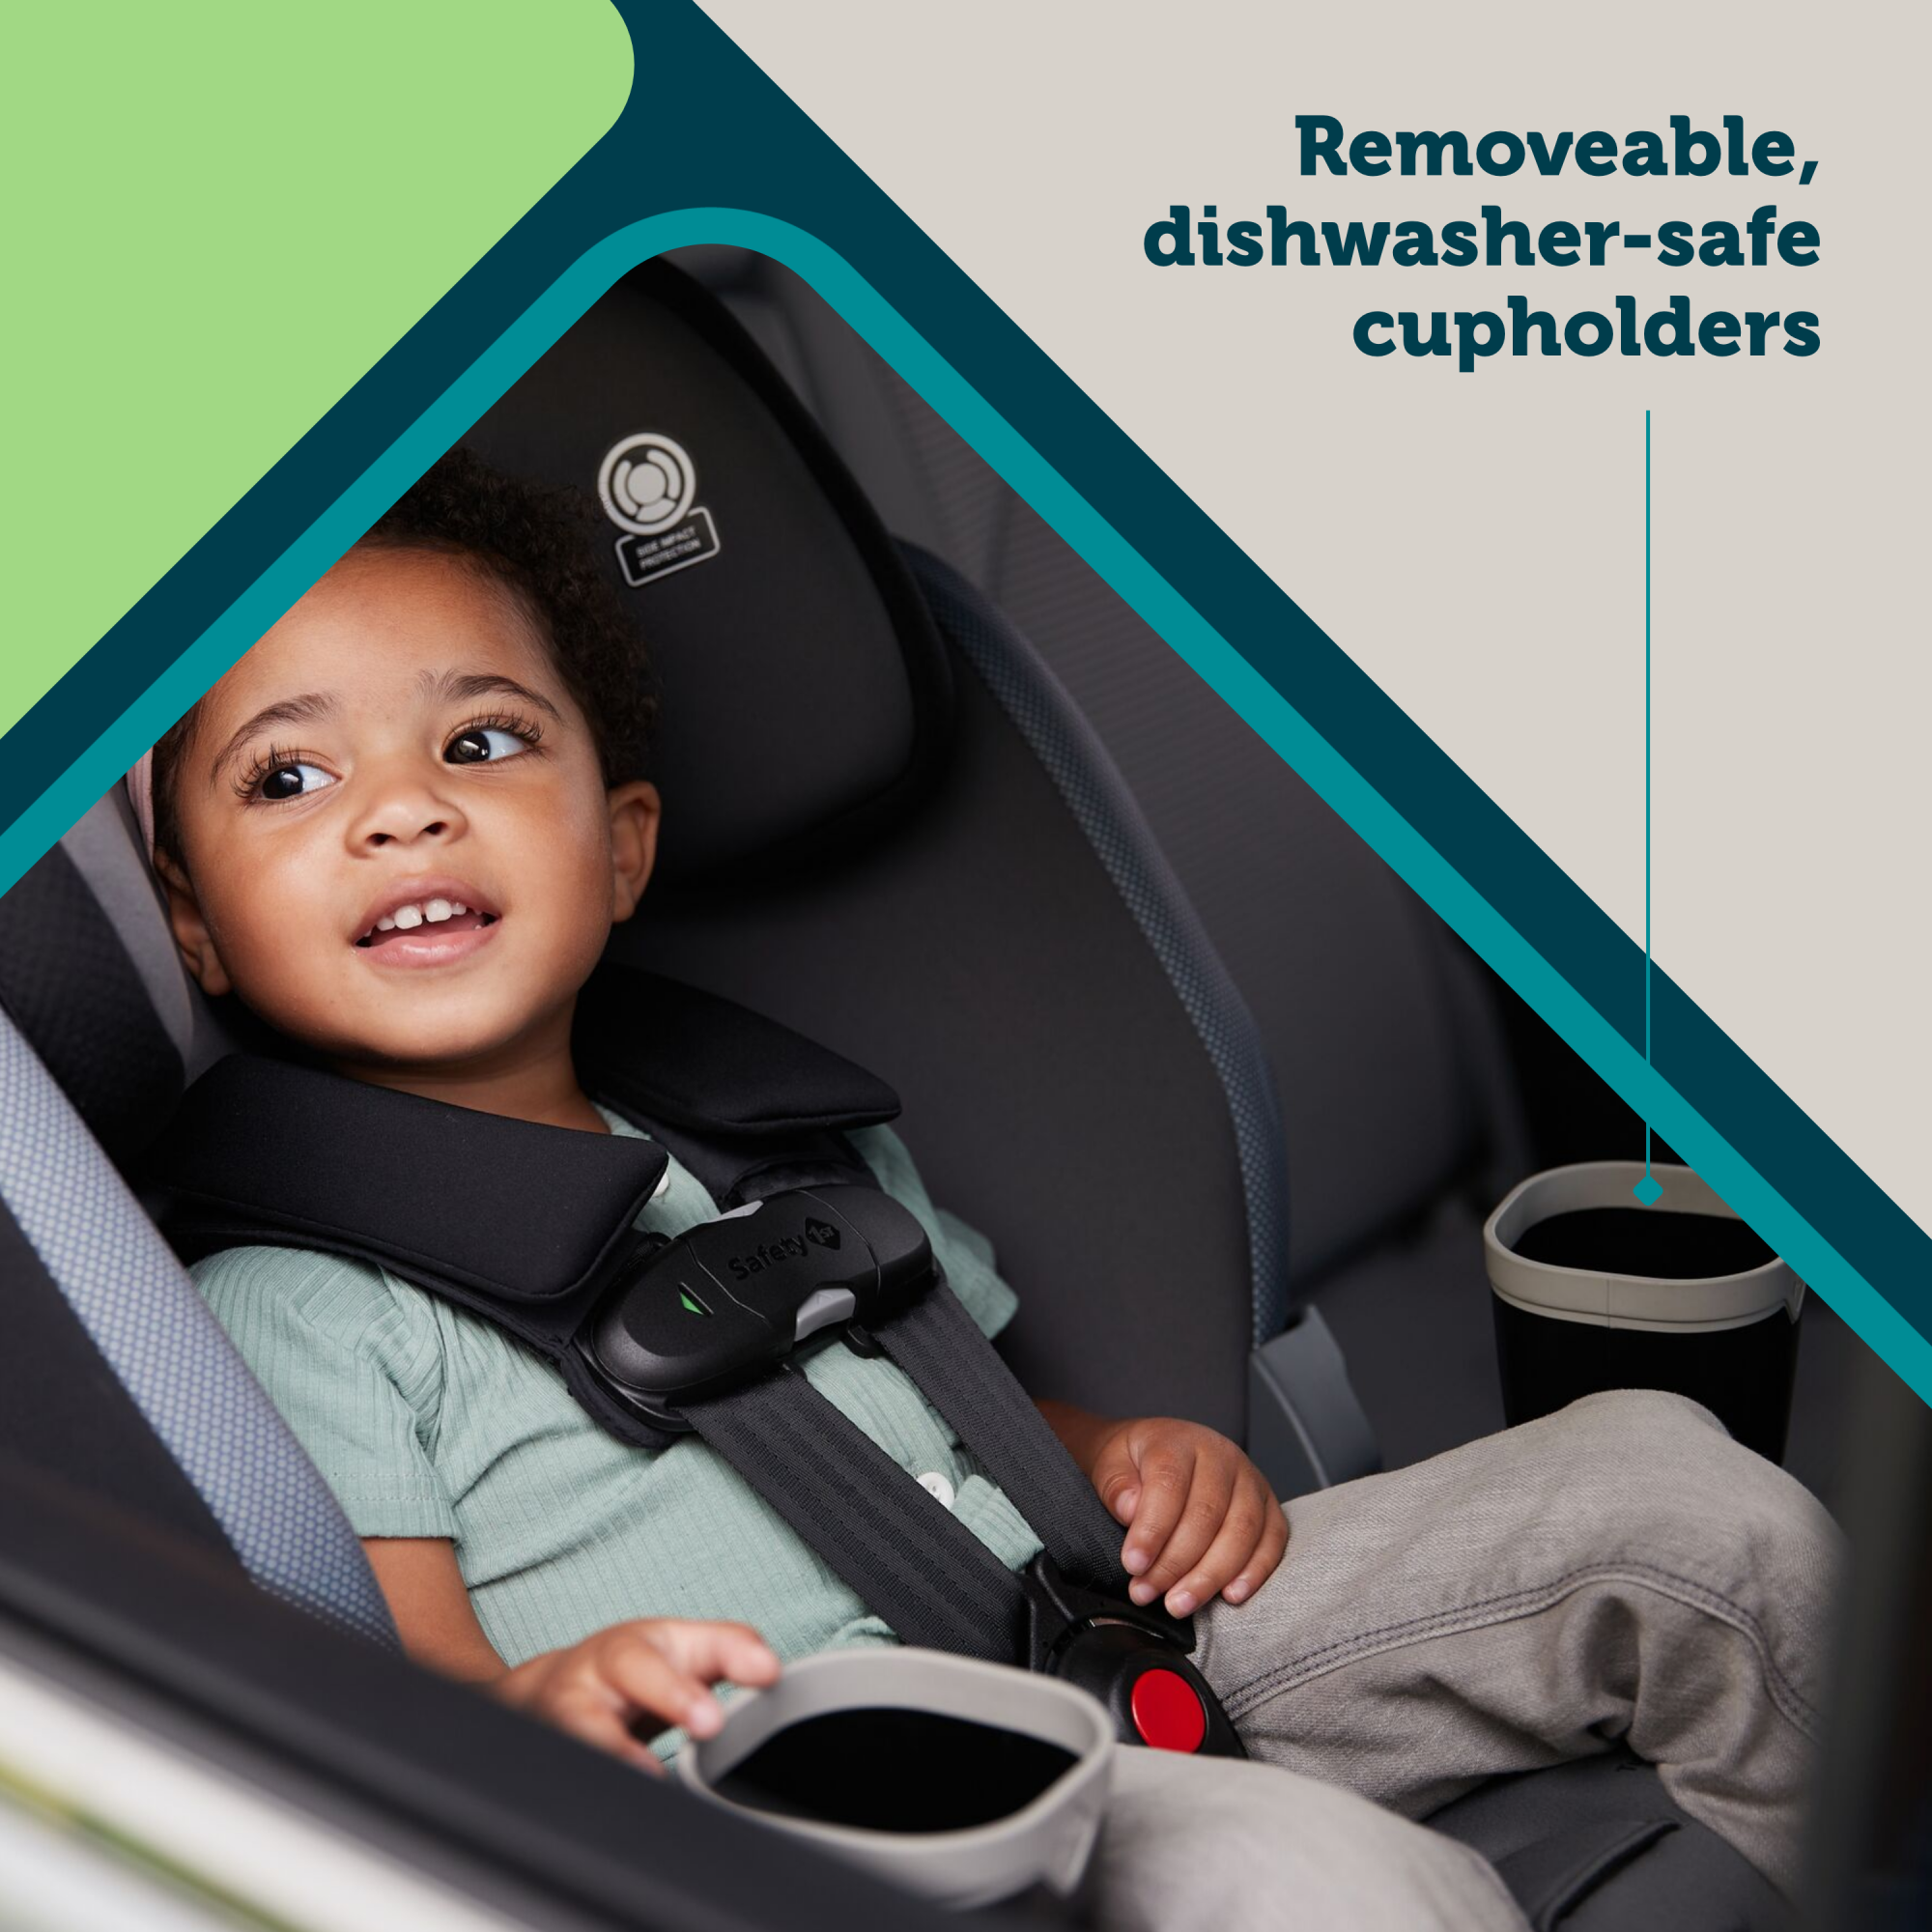 Turn and Go 360 DLX Rotating All-in-One Convertible Car Seat - removable, dishwasher-safe cup holders